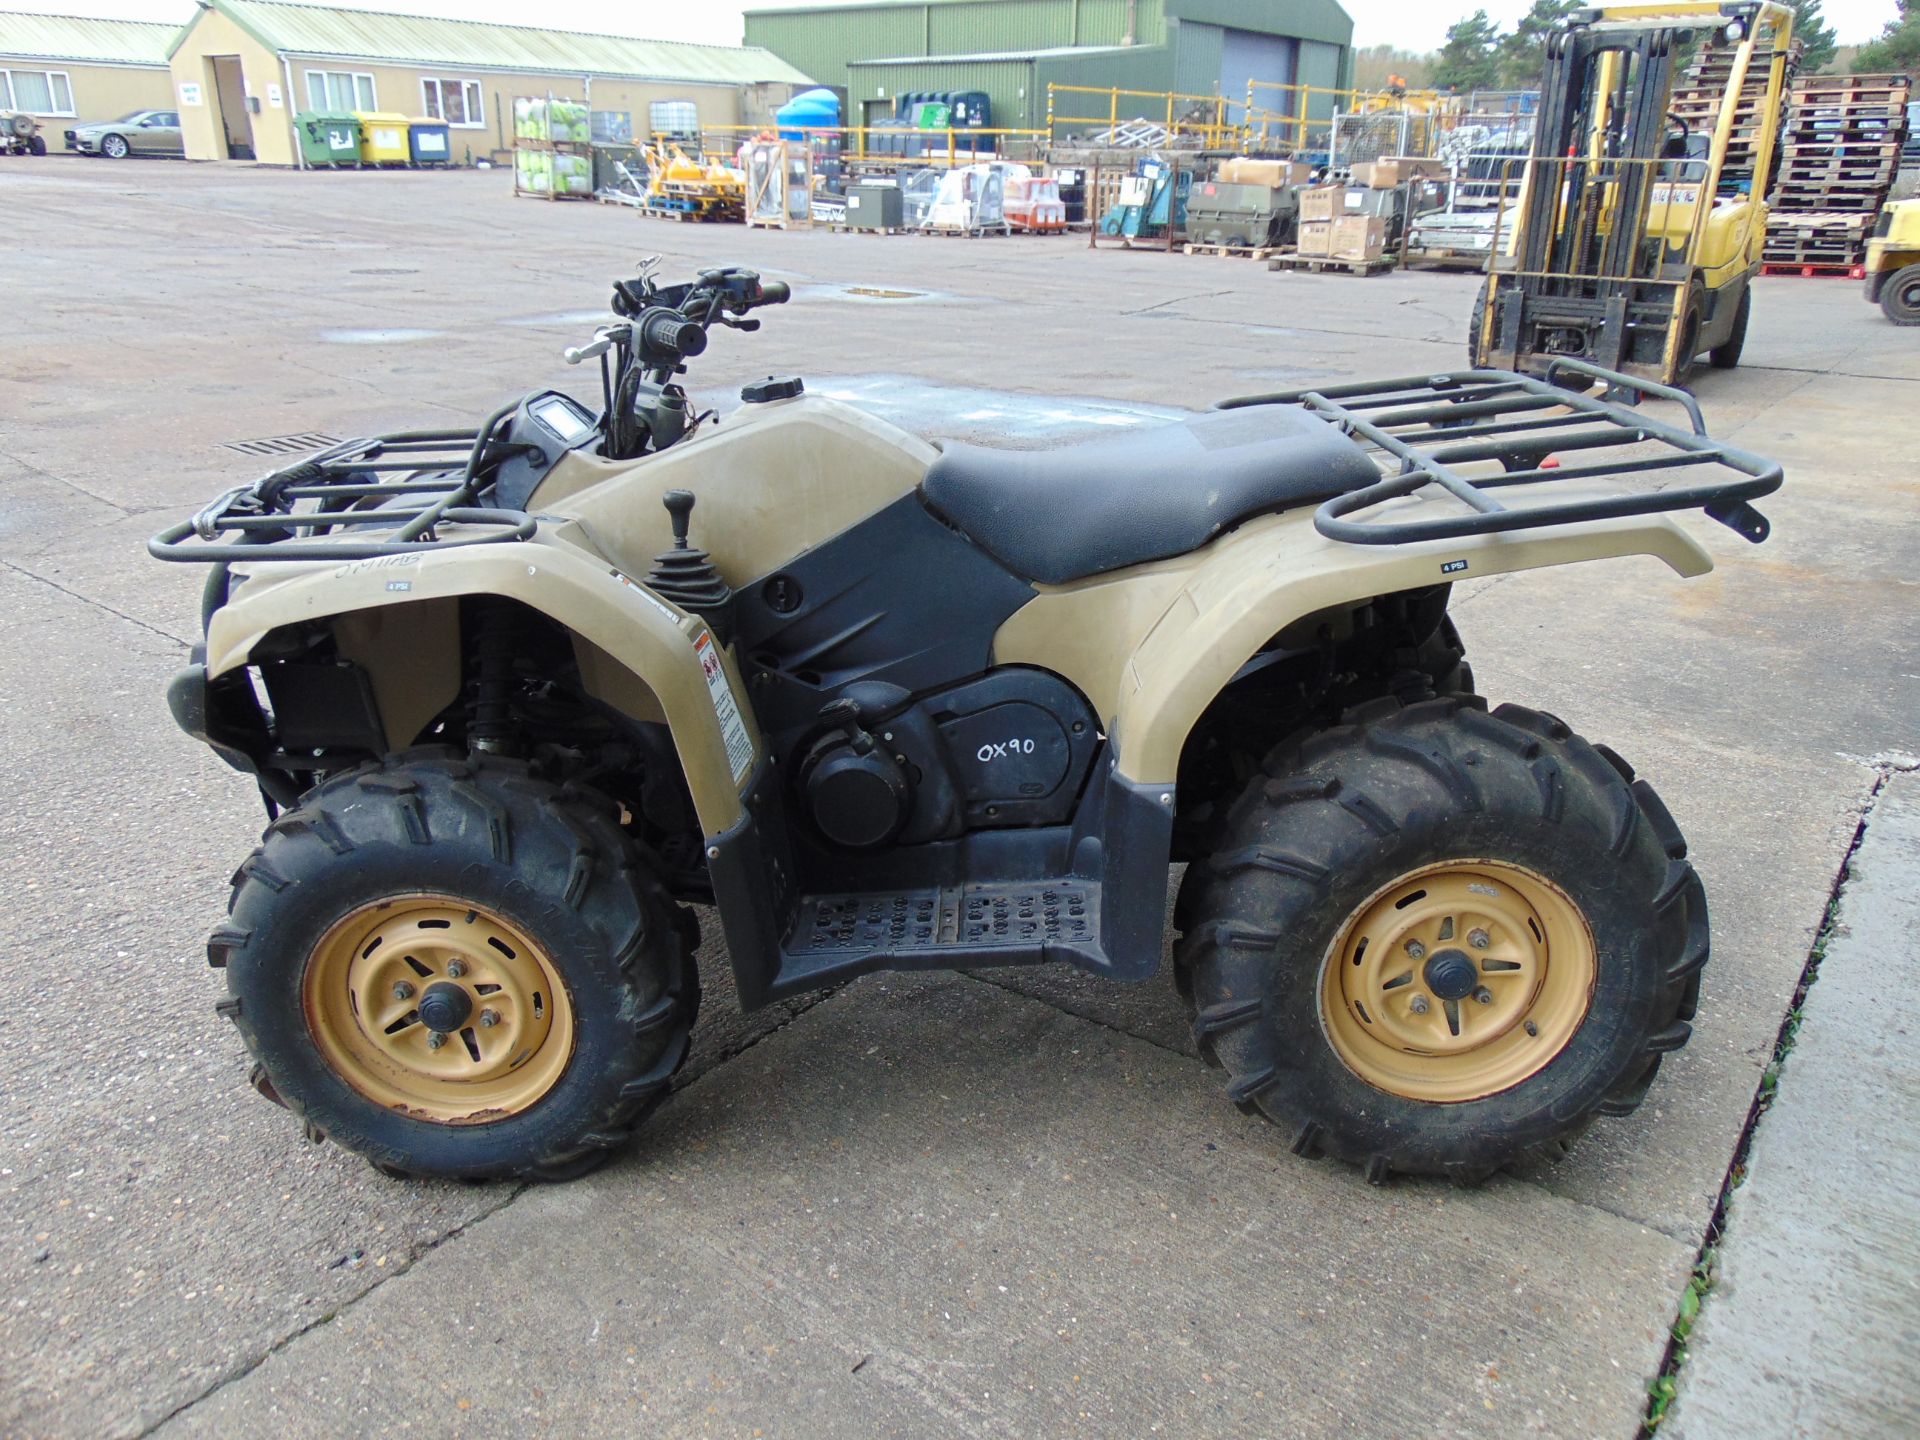 Military Specification Yamaha Grizzly 450 4 x 4 ATV Quad Bike Complete with Winch ONLY 591 HOURS! - Image 4 of 16